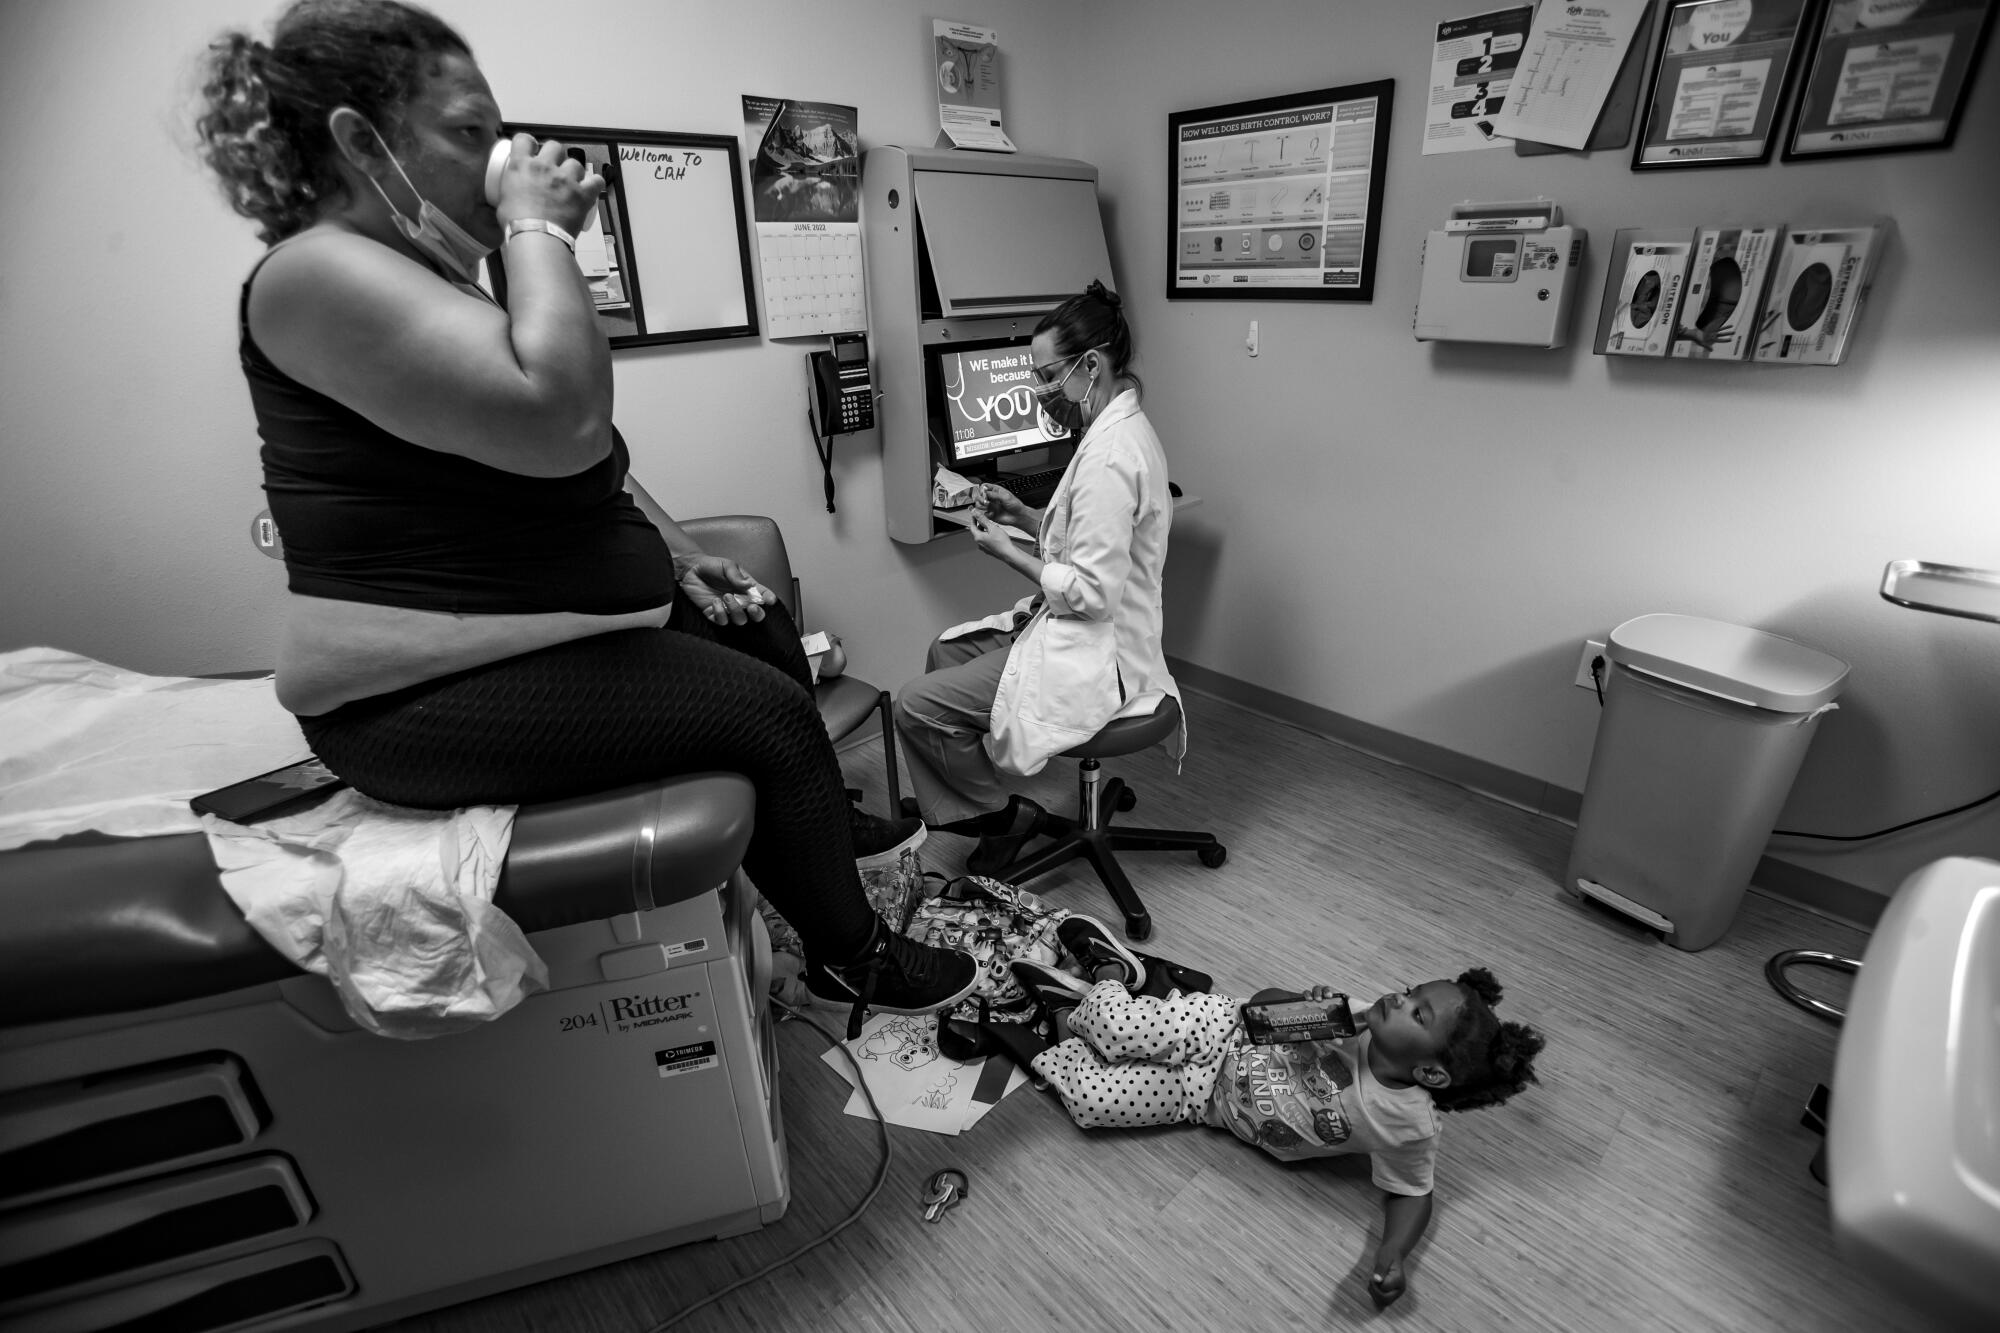 A woman sitting on an exam table drinks from a cup as a doctor sits nearby and a child lies on the floor